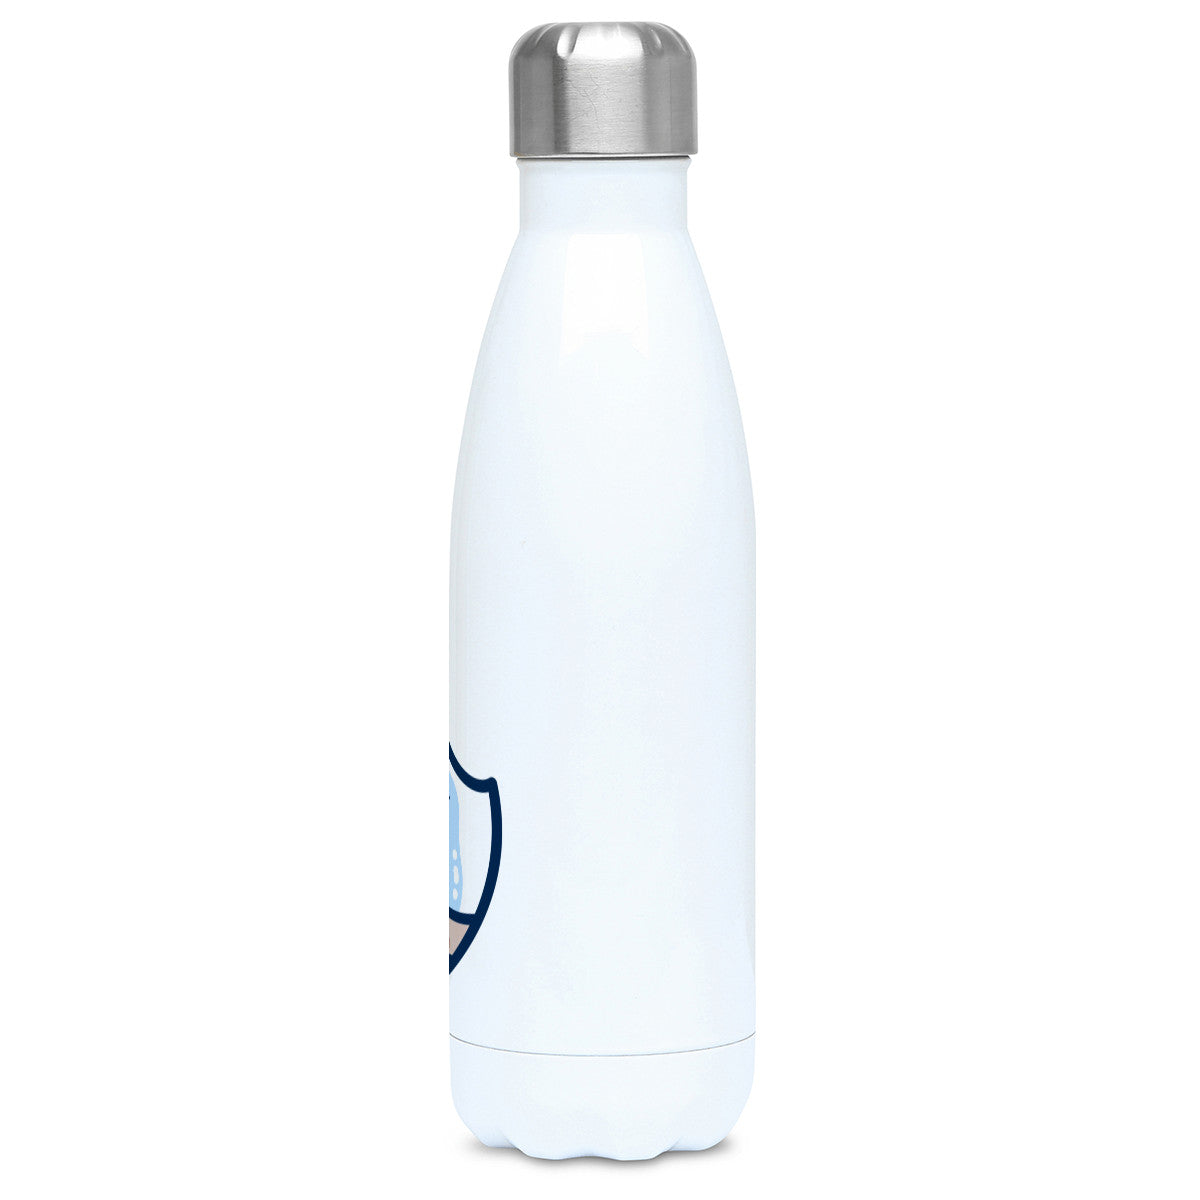 A tall white stainless steel drinks bottle seen side on with its silver lid on.